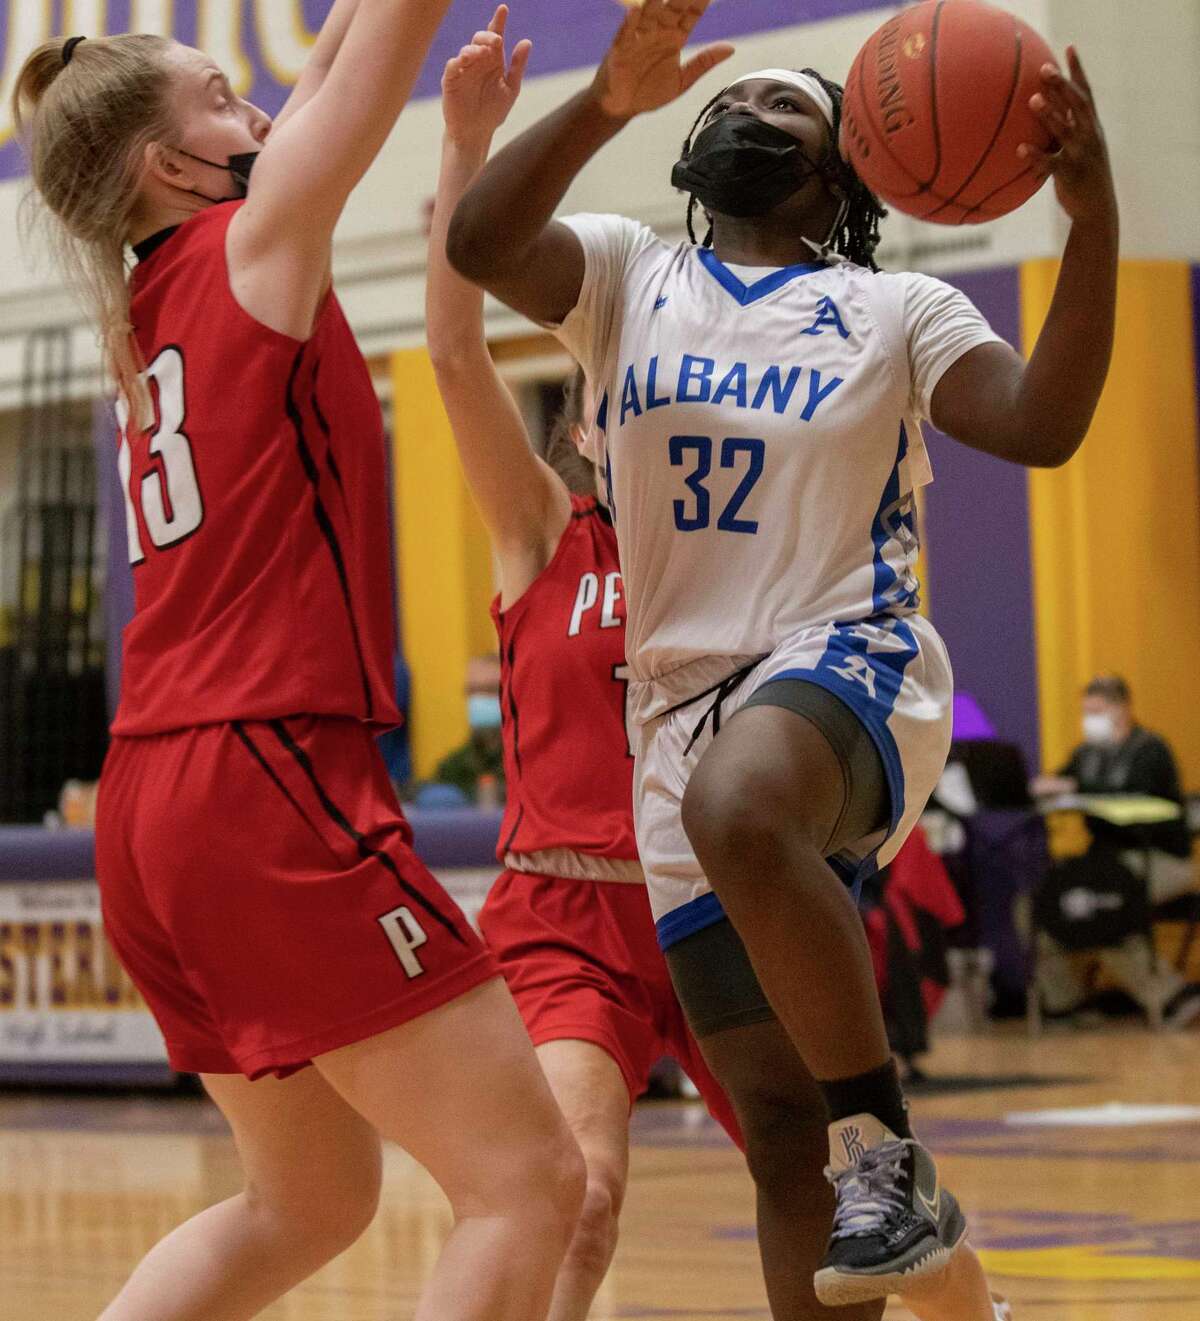 Albany's Azera Gates is guarded by Penfield’s Jackie Funk as she drives to the hoop during a basketball game on Monday, Dec. 27, 2021 in Amsterdam, N.Y.